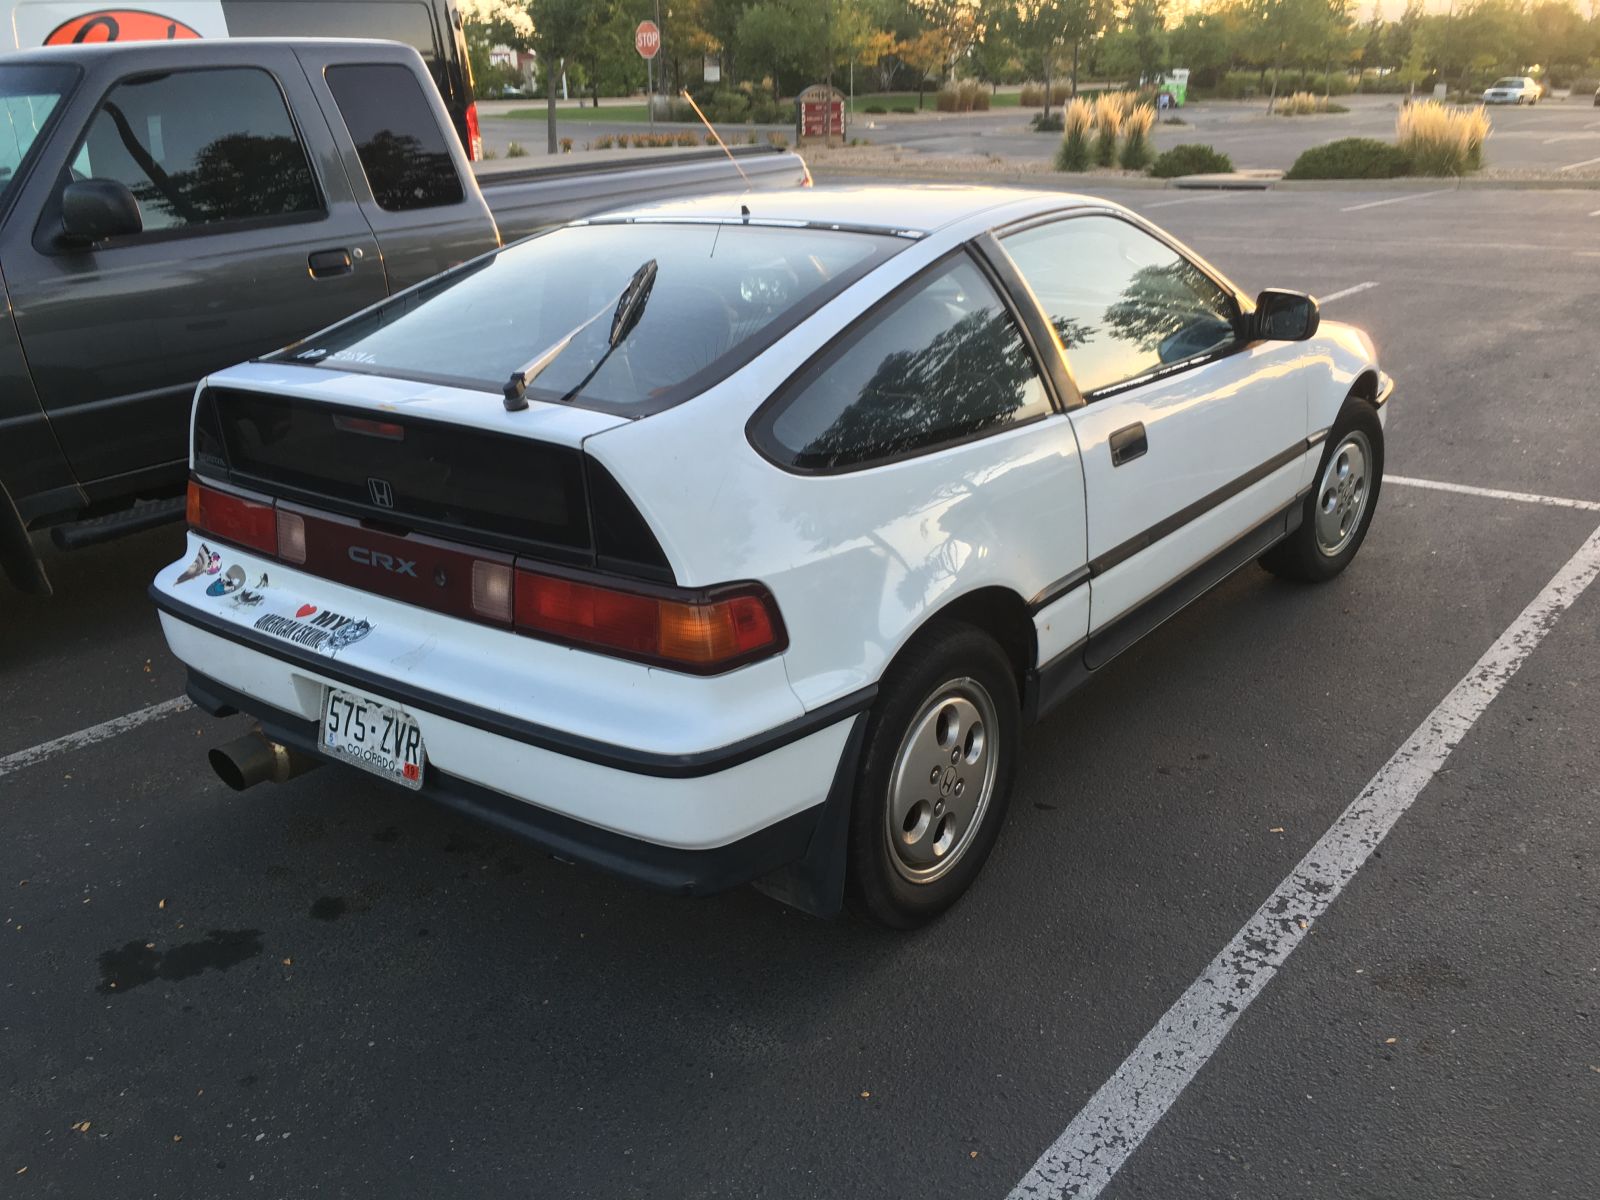 This very clean CRX was near the RX-7 at Best Buy